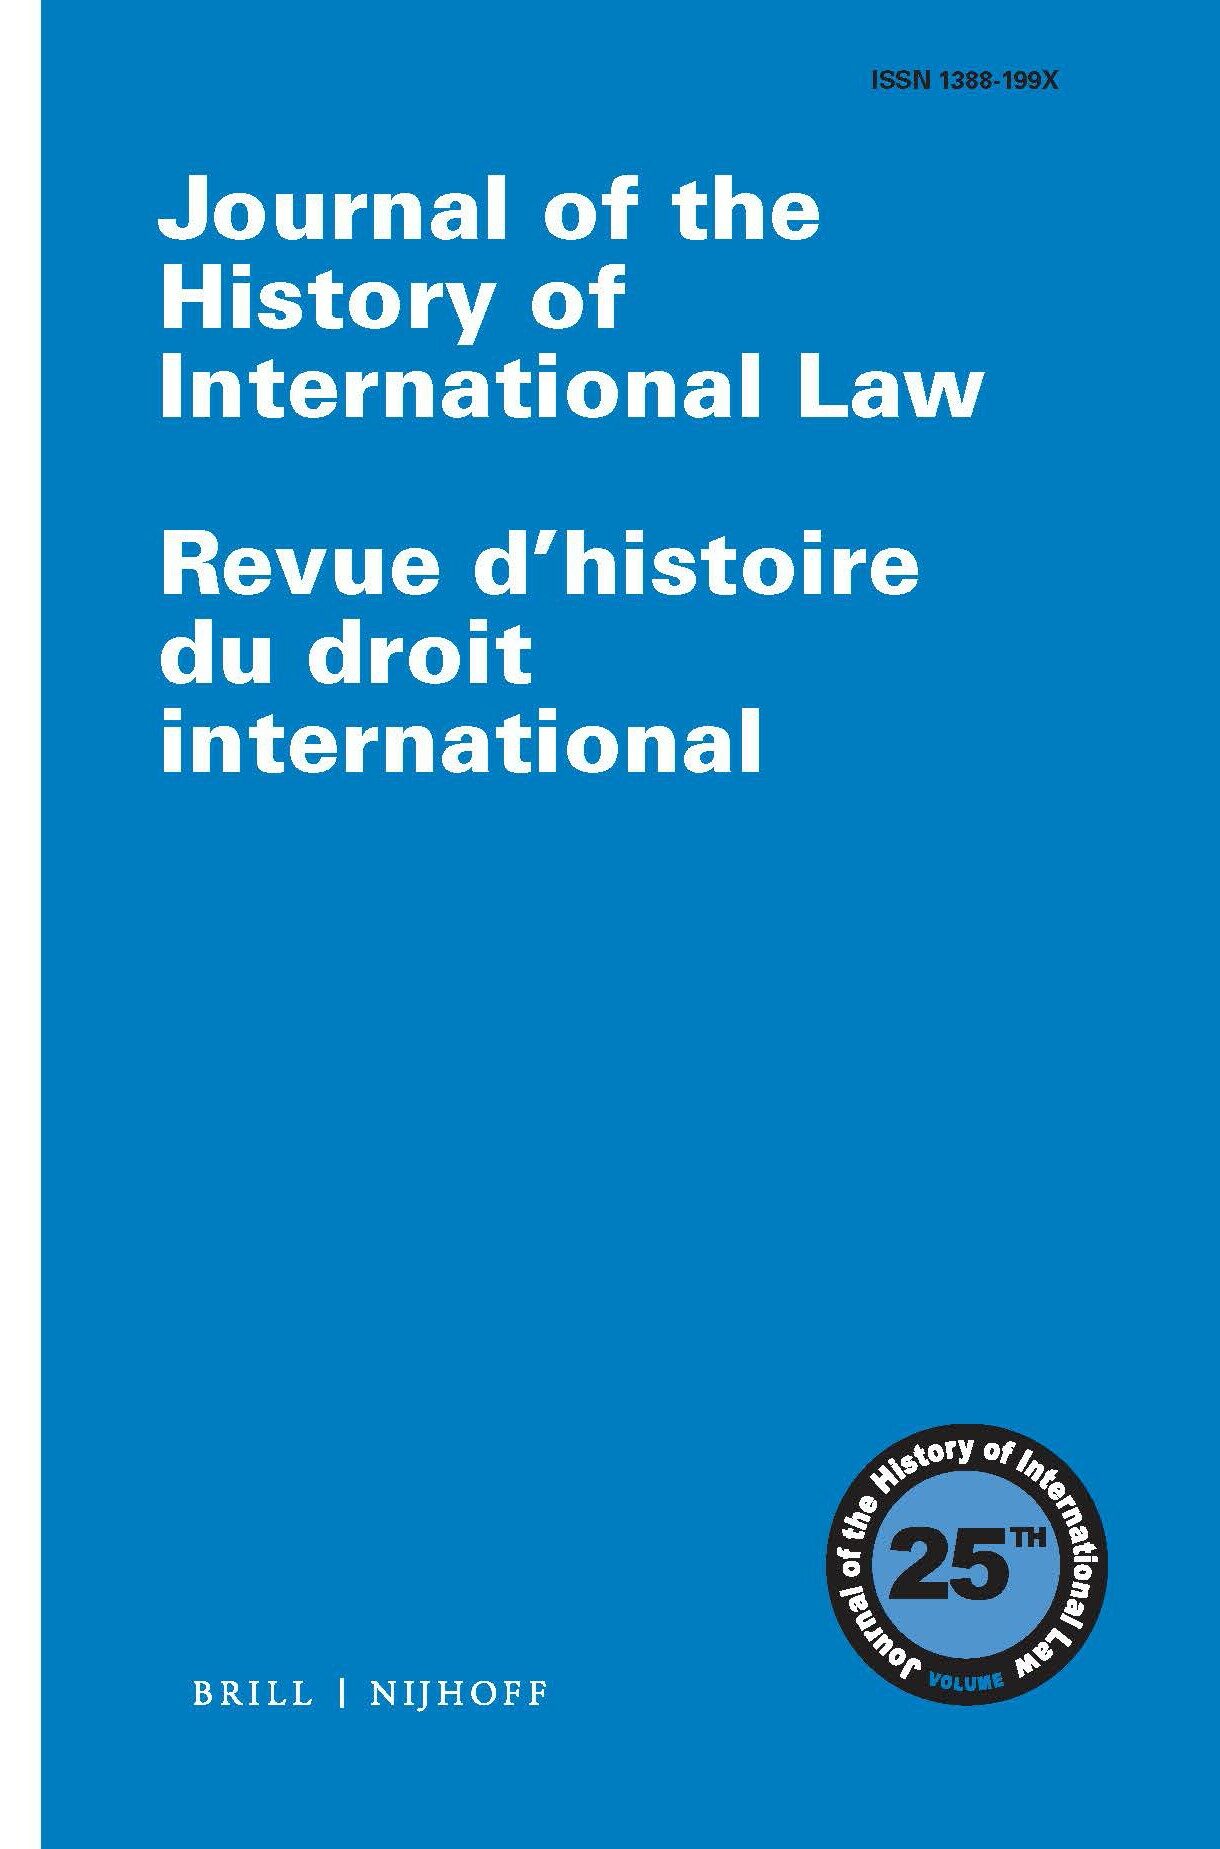 The Politics of History in the late Qing Era: W.A.P. Martin and a History of International Law for China, The Journal of the History of International Law / Revue d’histoire du droit international 22.2-3 (2020).